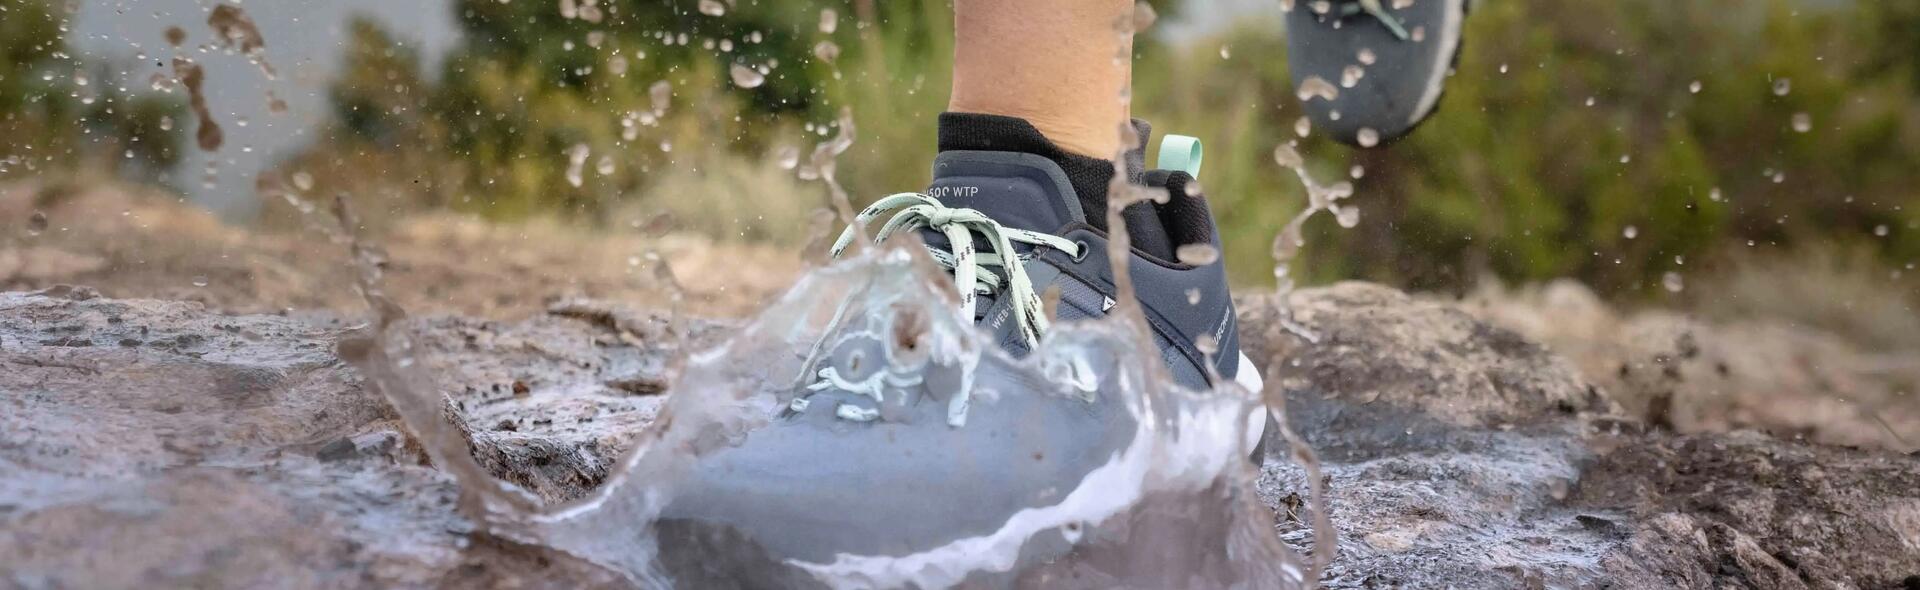 How to maintain your hiking boots